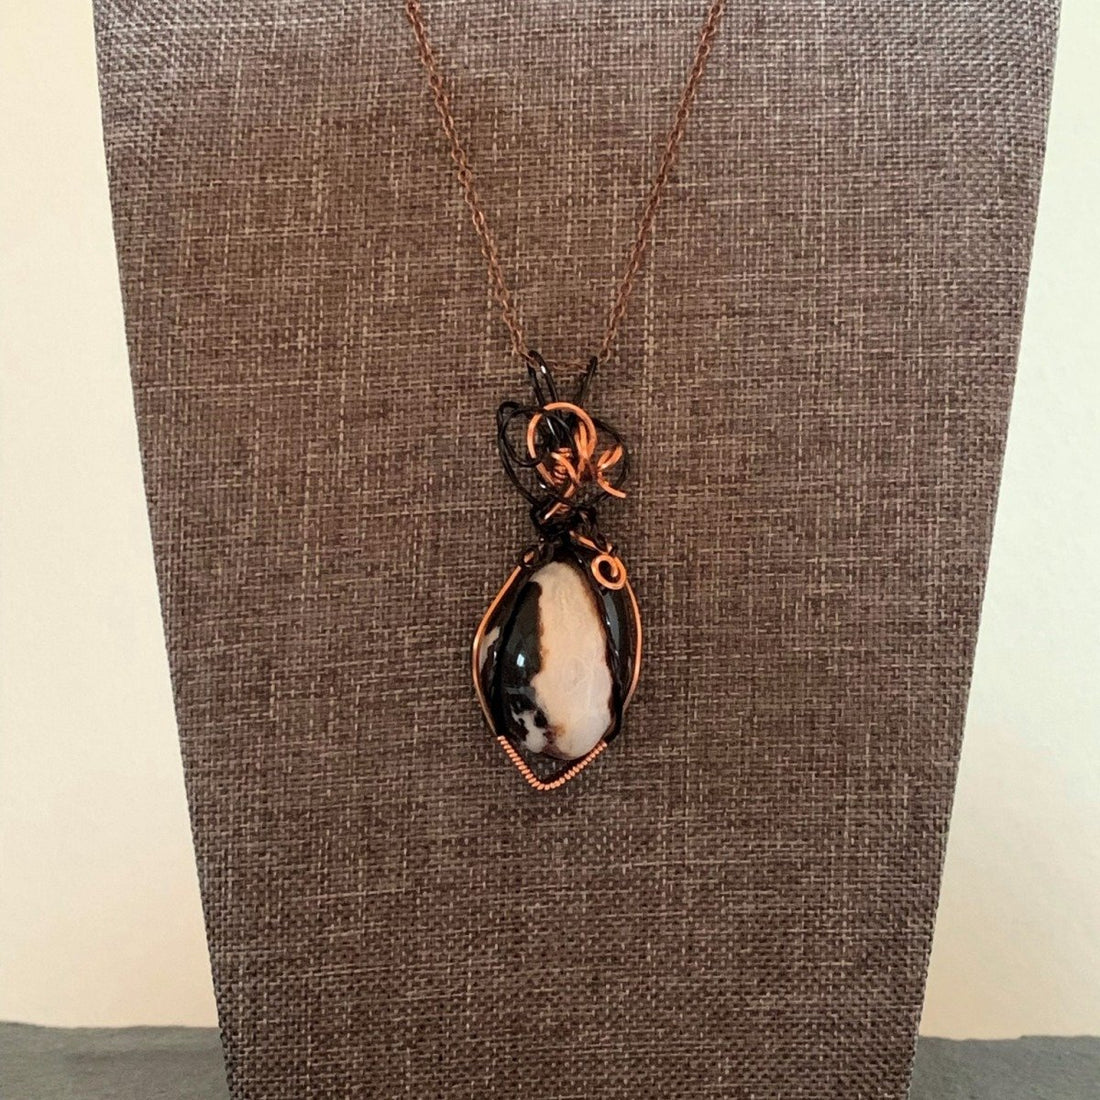 Pendant made of Black & White agate with black & copper wrap; 7/8" W X 2 3/8" H INCL BAIL